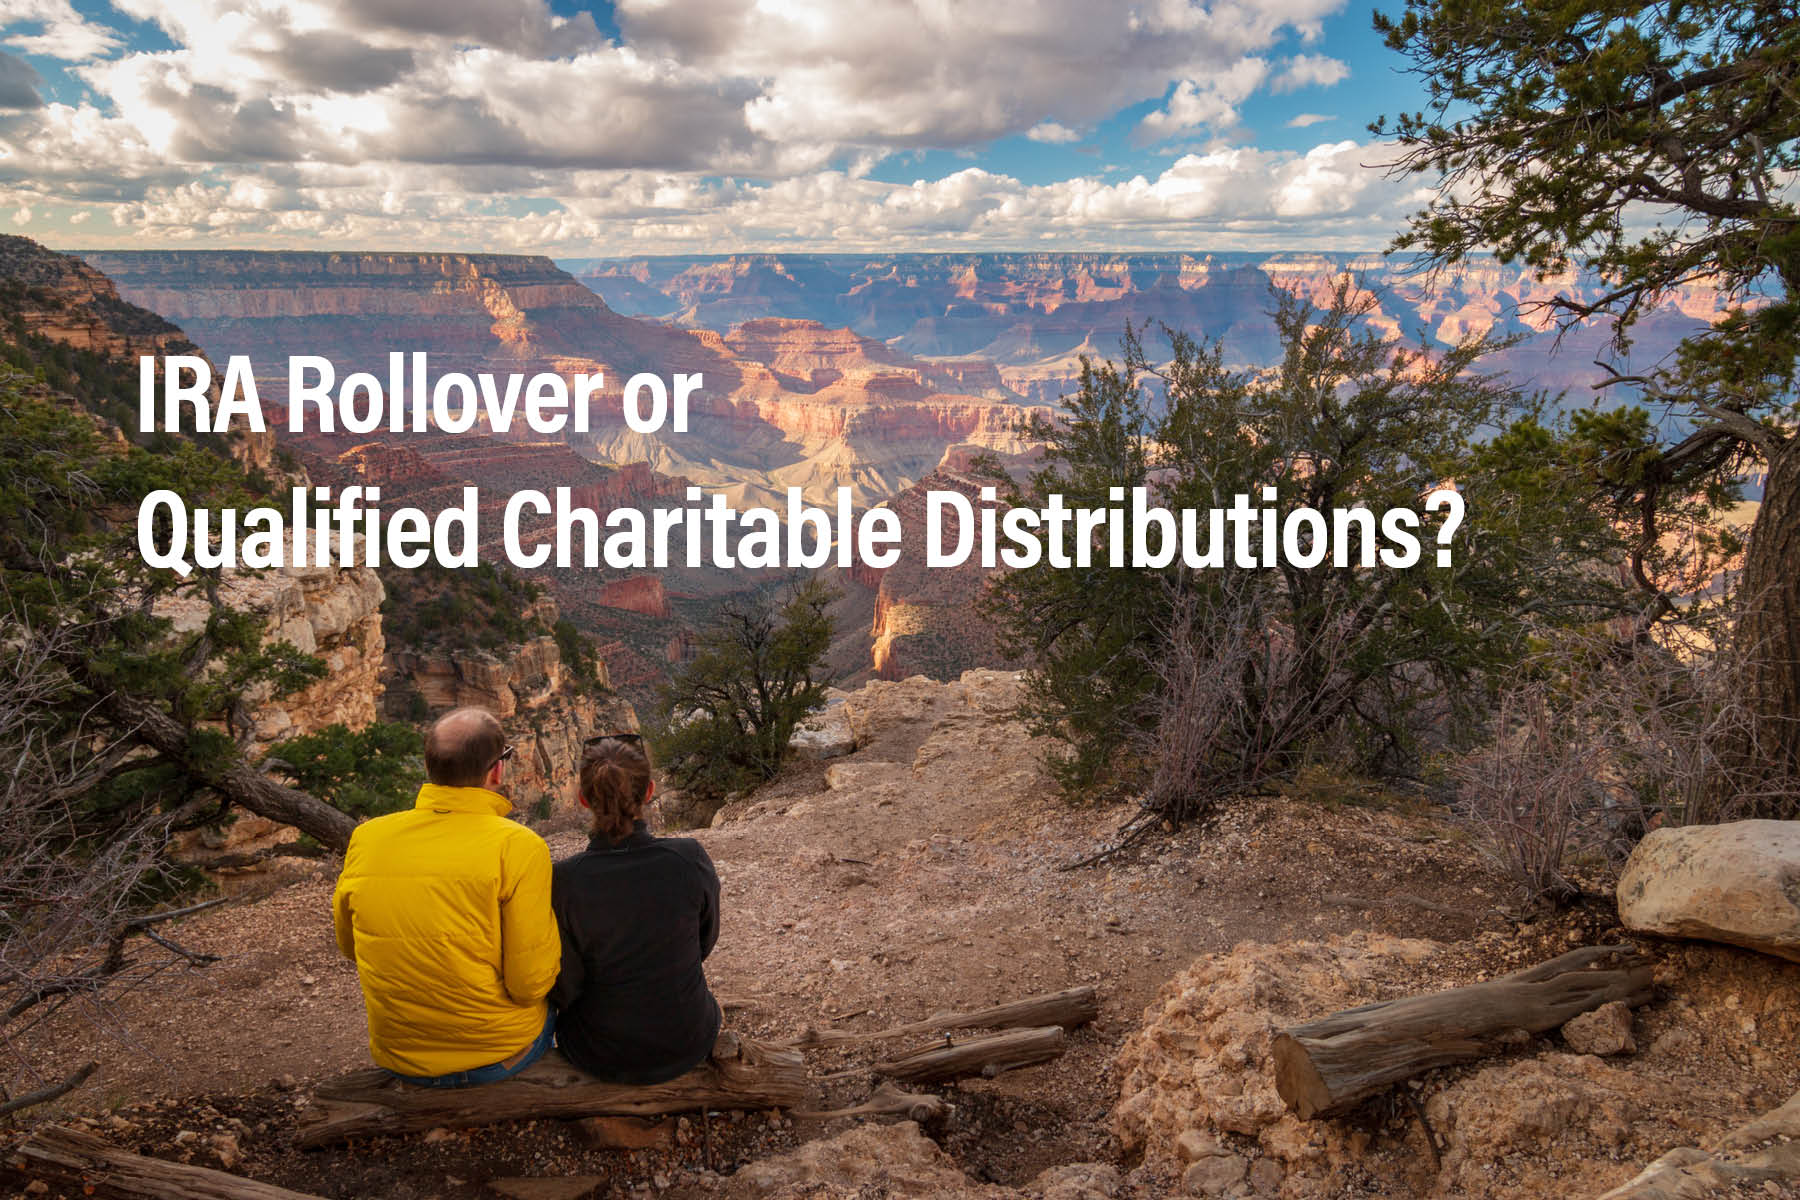 IRA Qualified Charitable Distributions